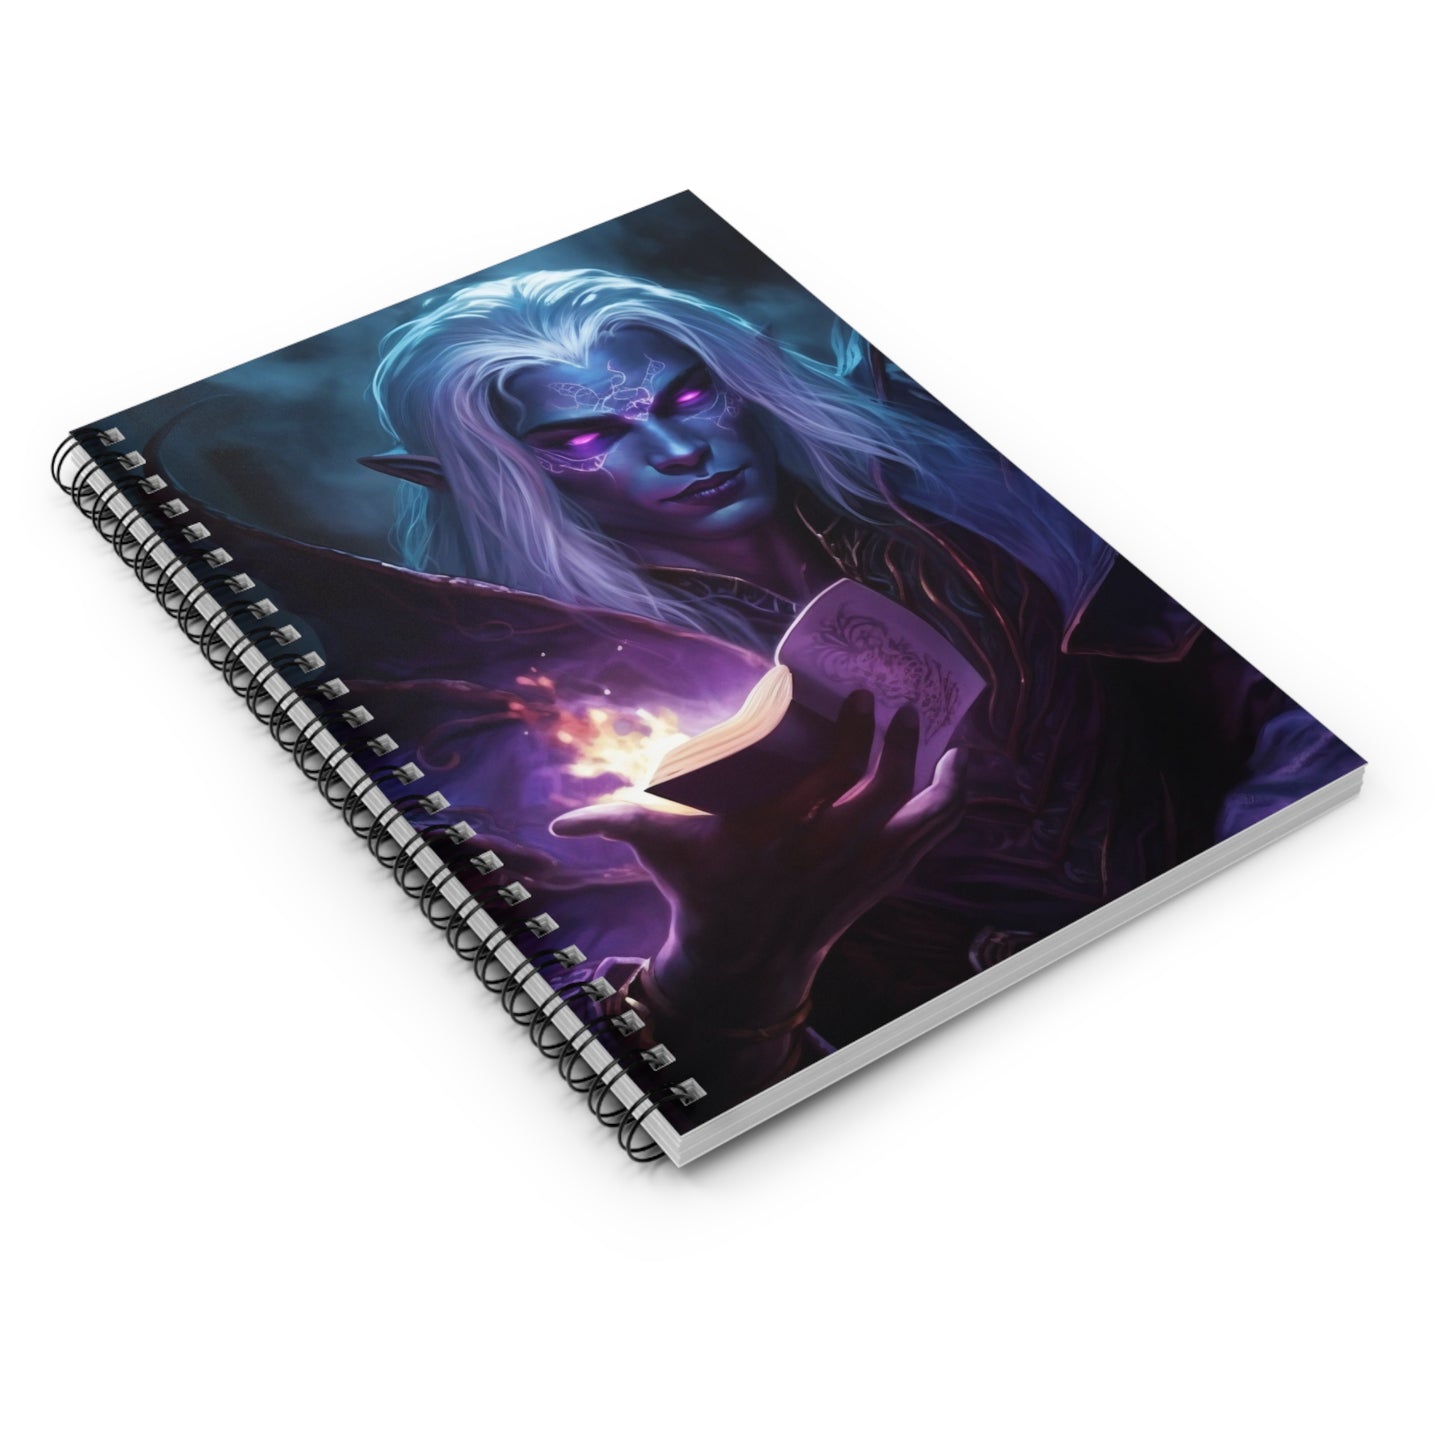 DnD Campaign Journal, Drow Dark Elf Warlock Spiral Notebook, Ruled Line, Tabletop Gaming D&D Character Notepad, Pathfinder Journal, Diary